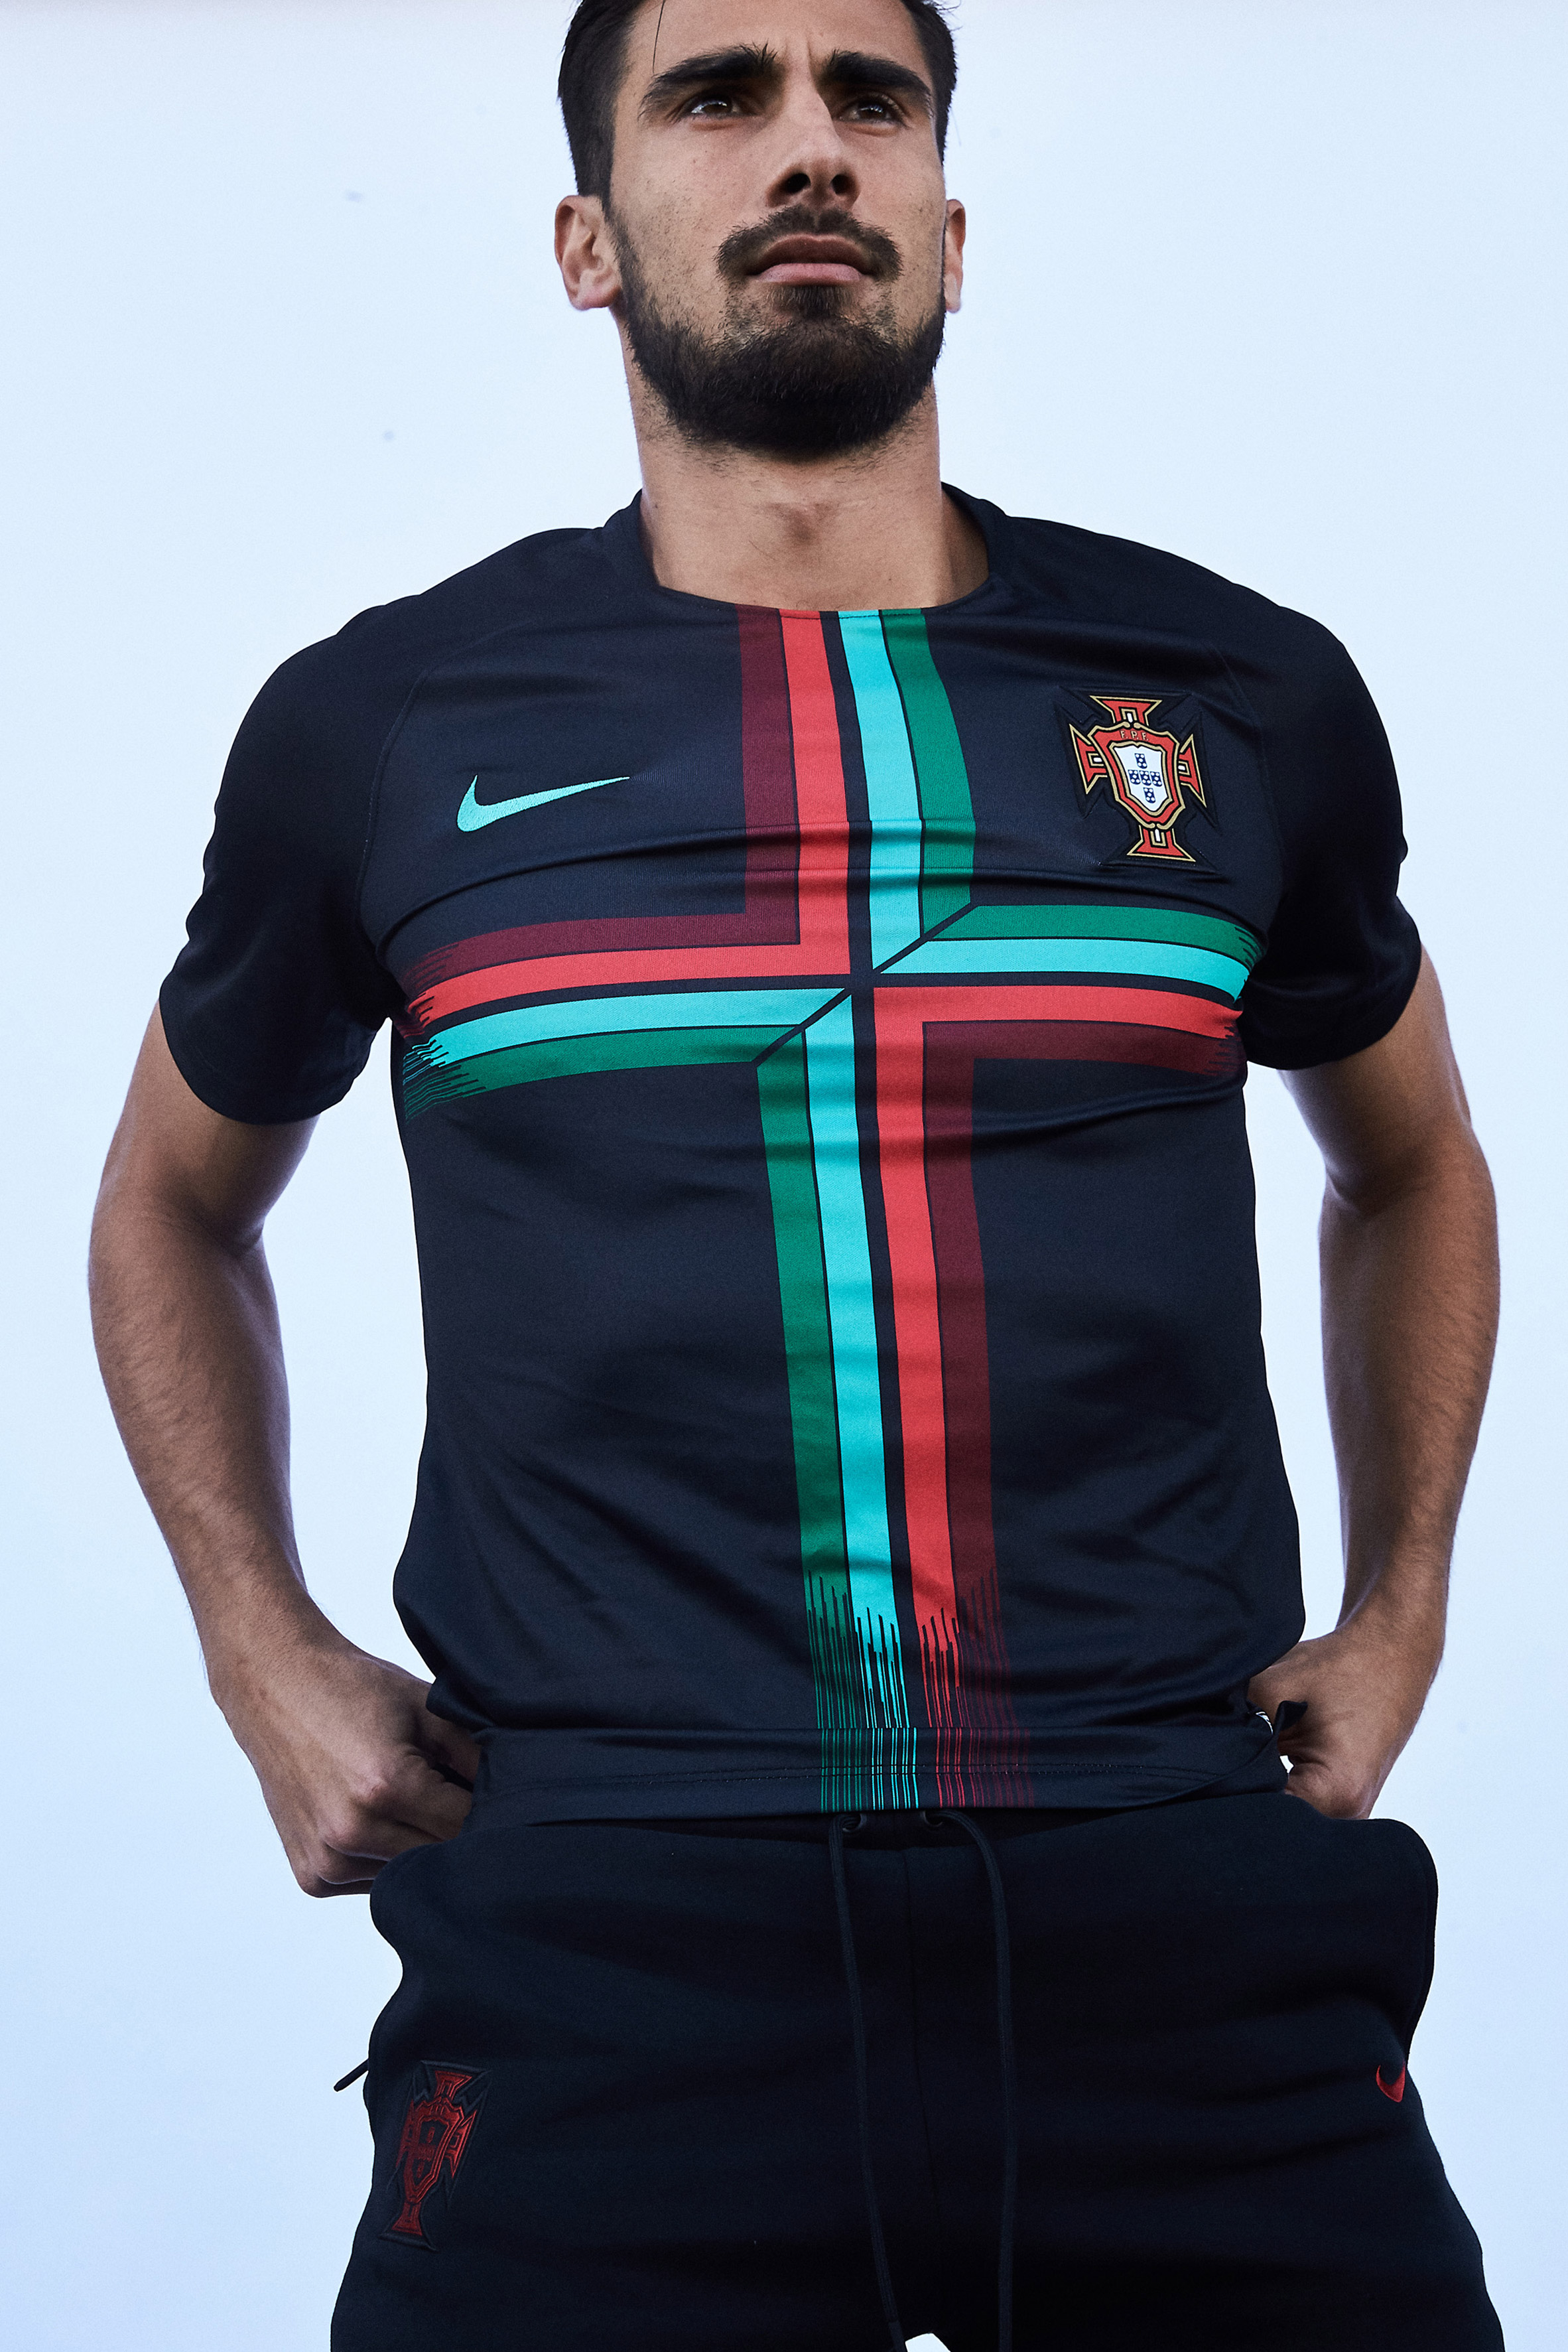 portugal world cup jersey